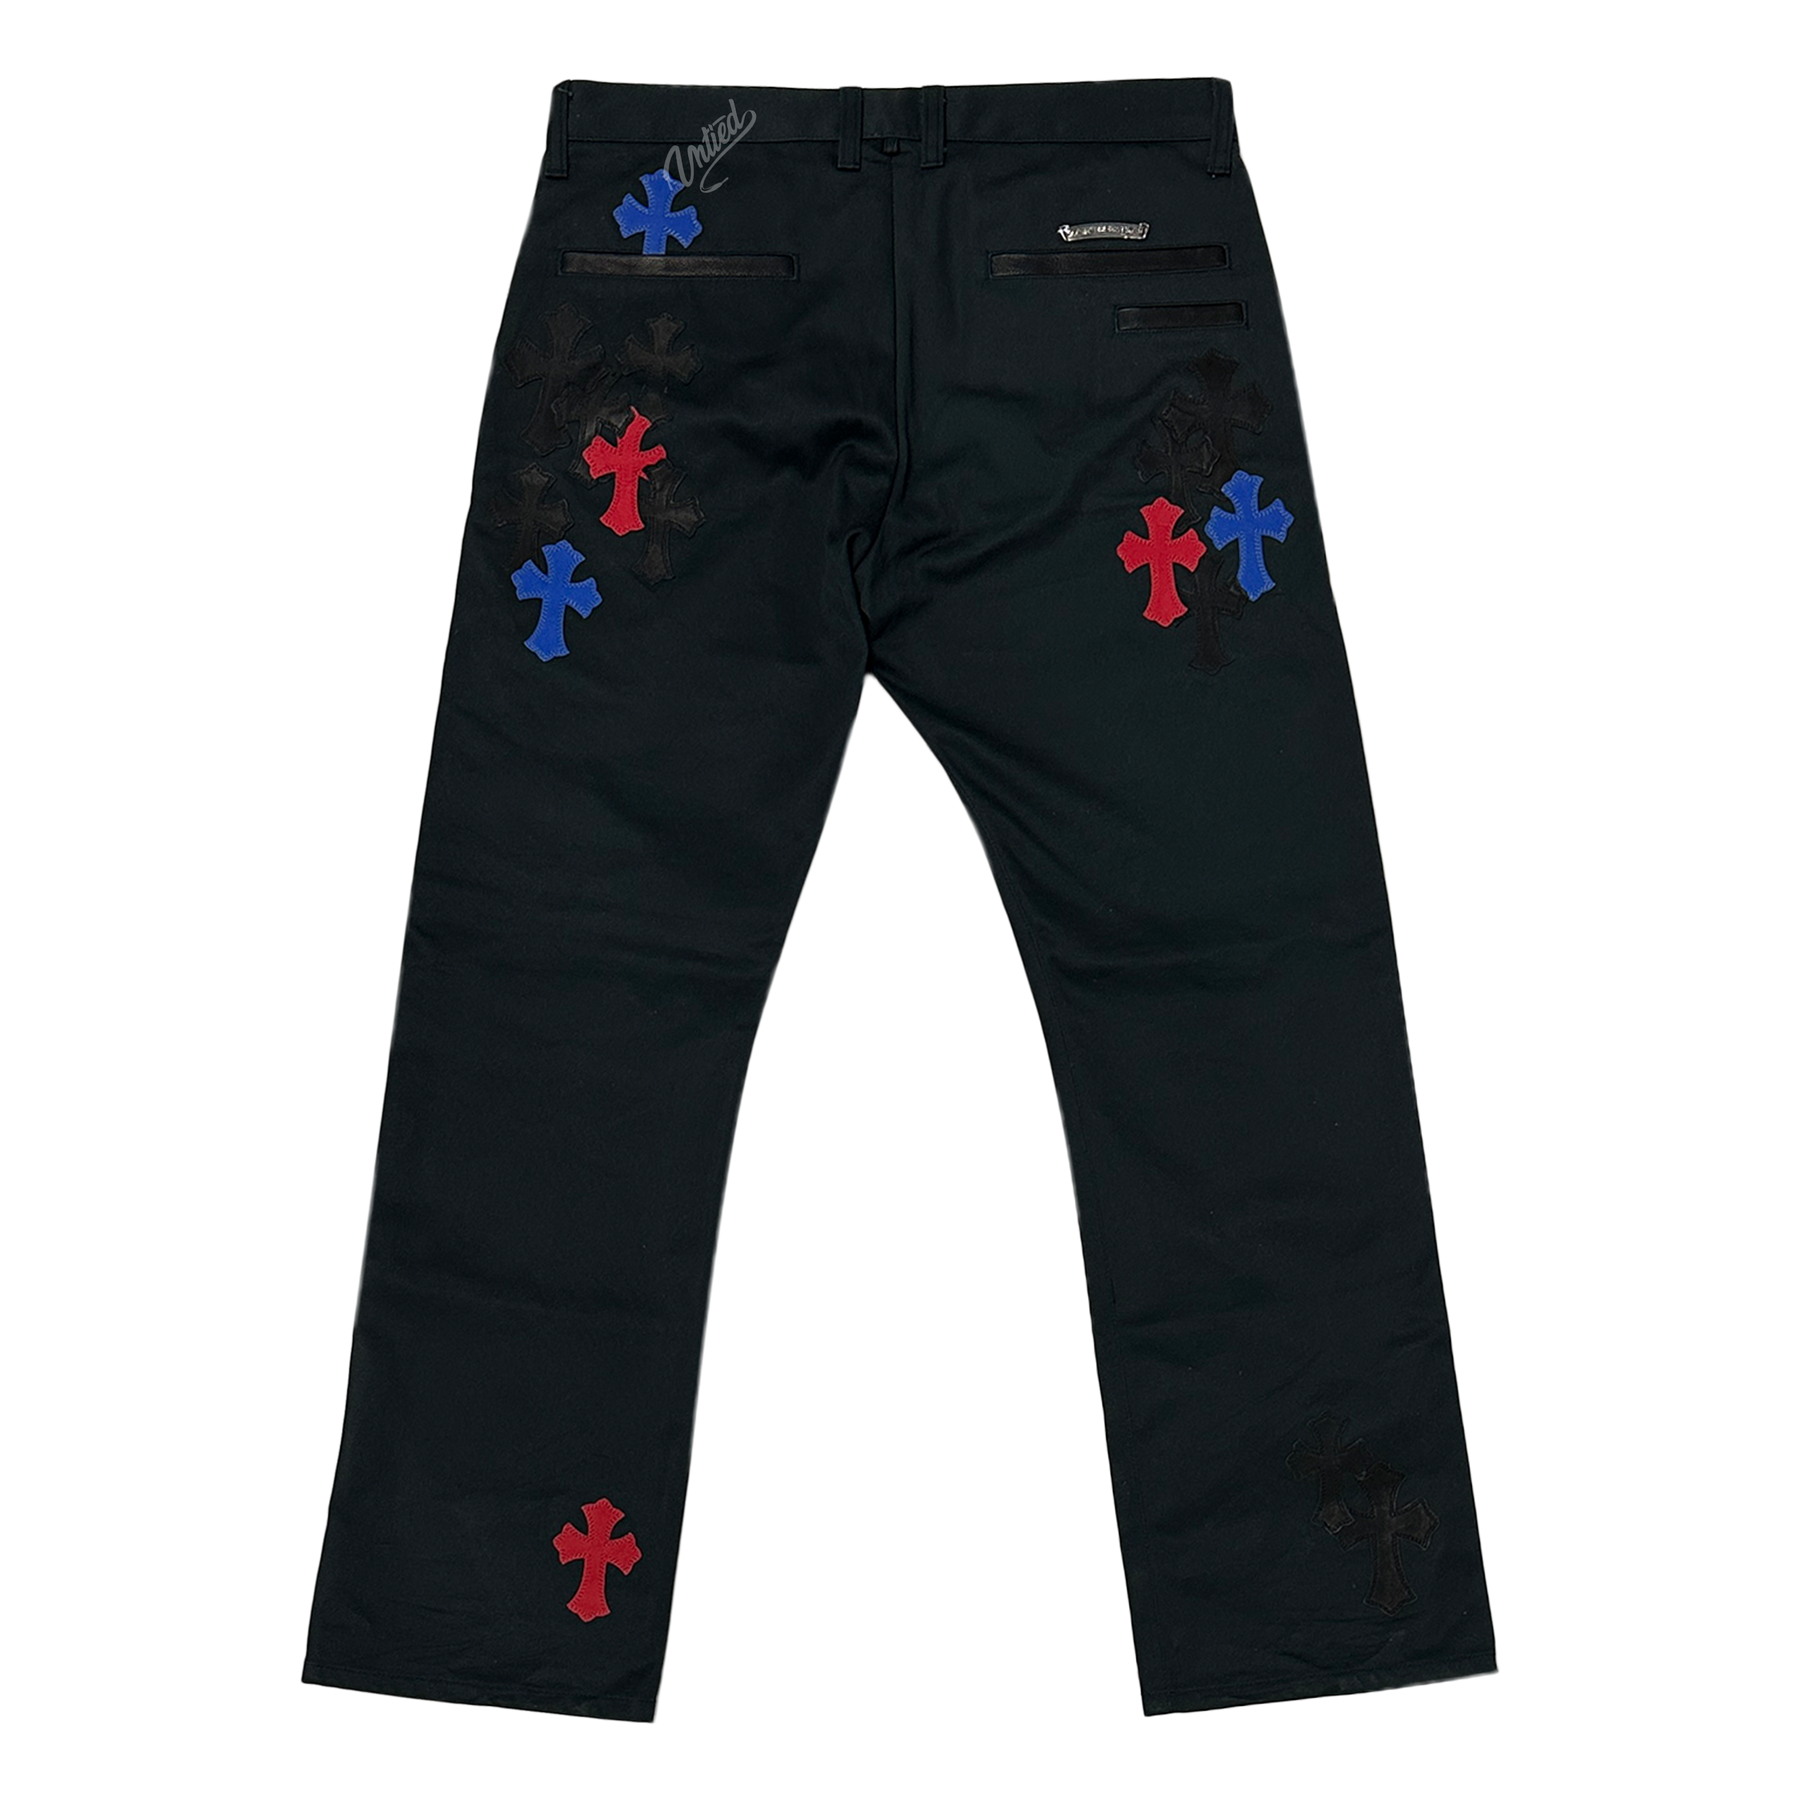 Chrome Hearts Multicolor Cross Patch Chino Pants "Black/Red/Blue/Black"